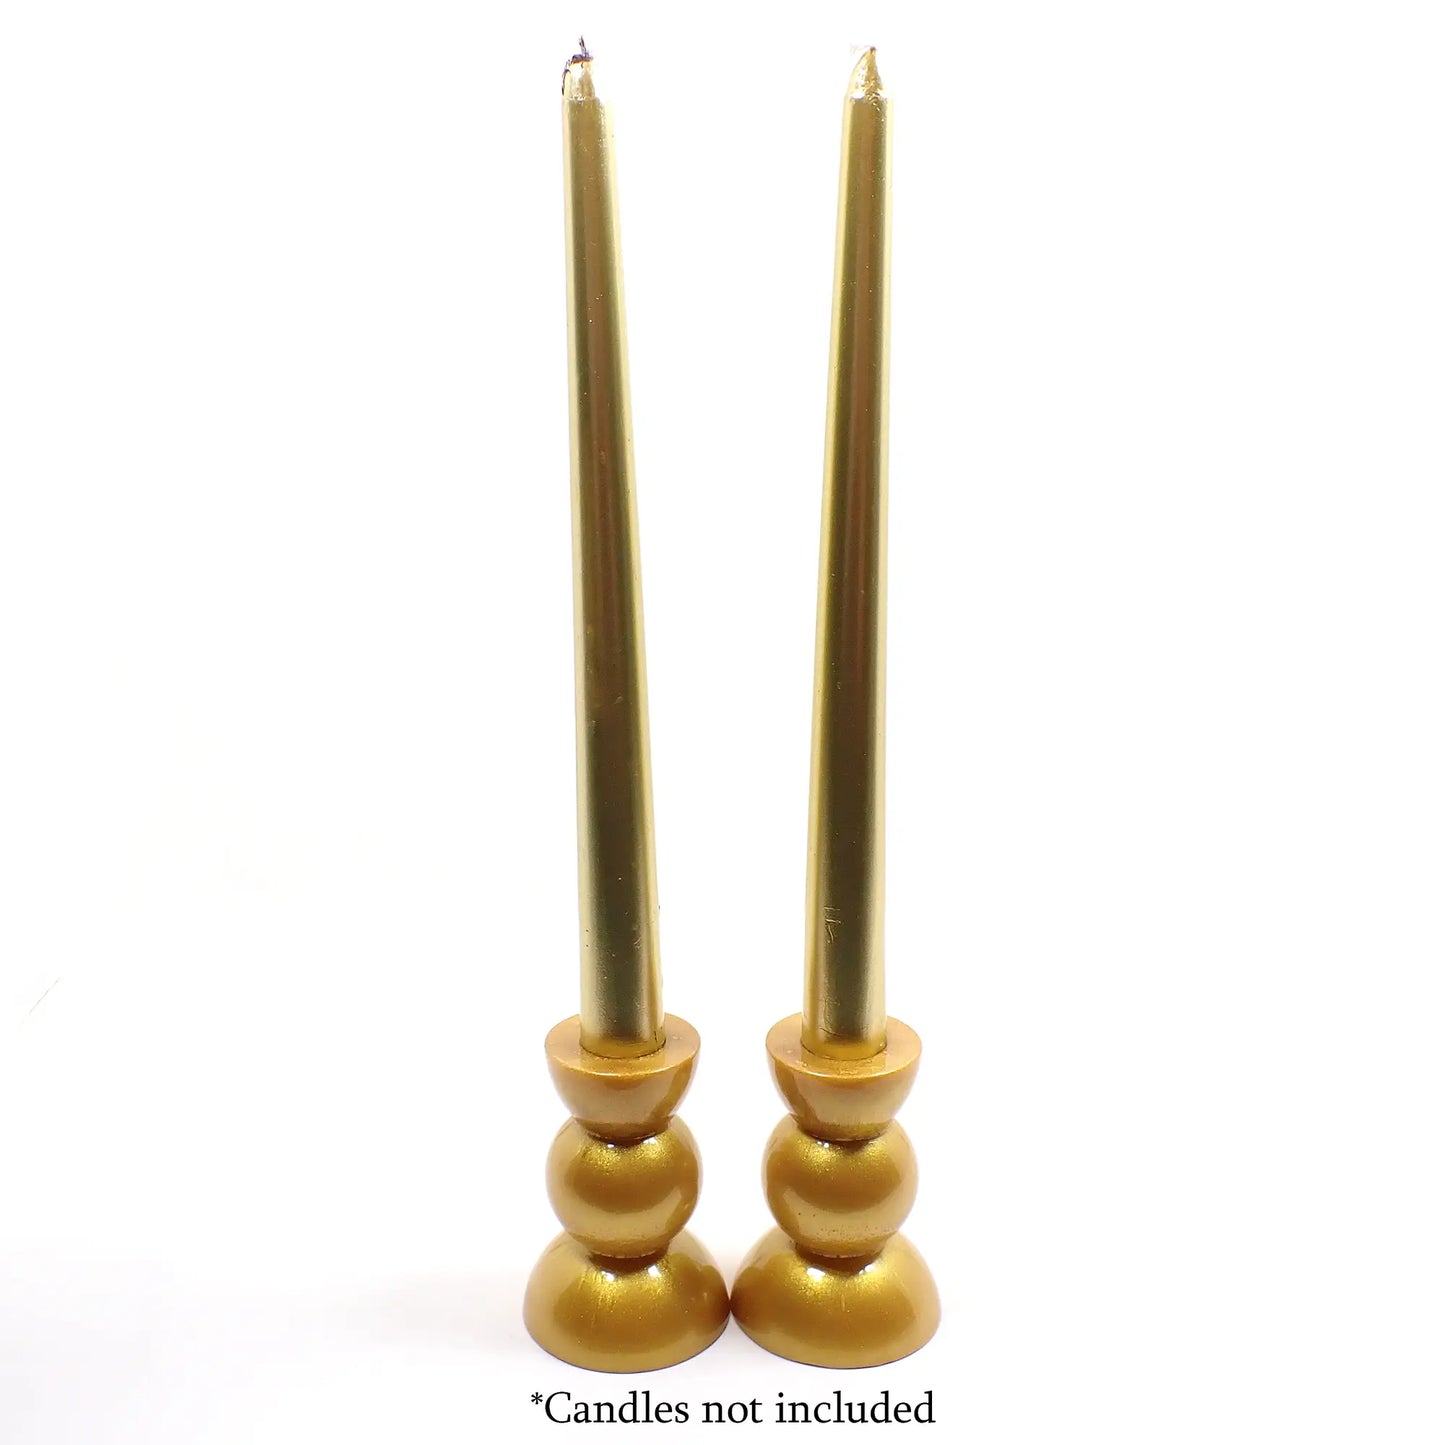 Set of Two Handmade Resin Pearly Metallic Gold Color Rounded Geometric Candlestick Holders